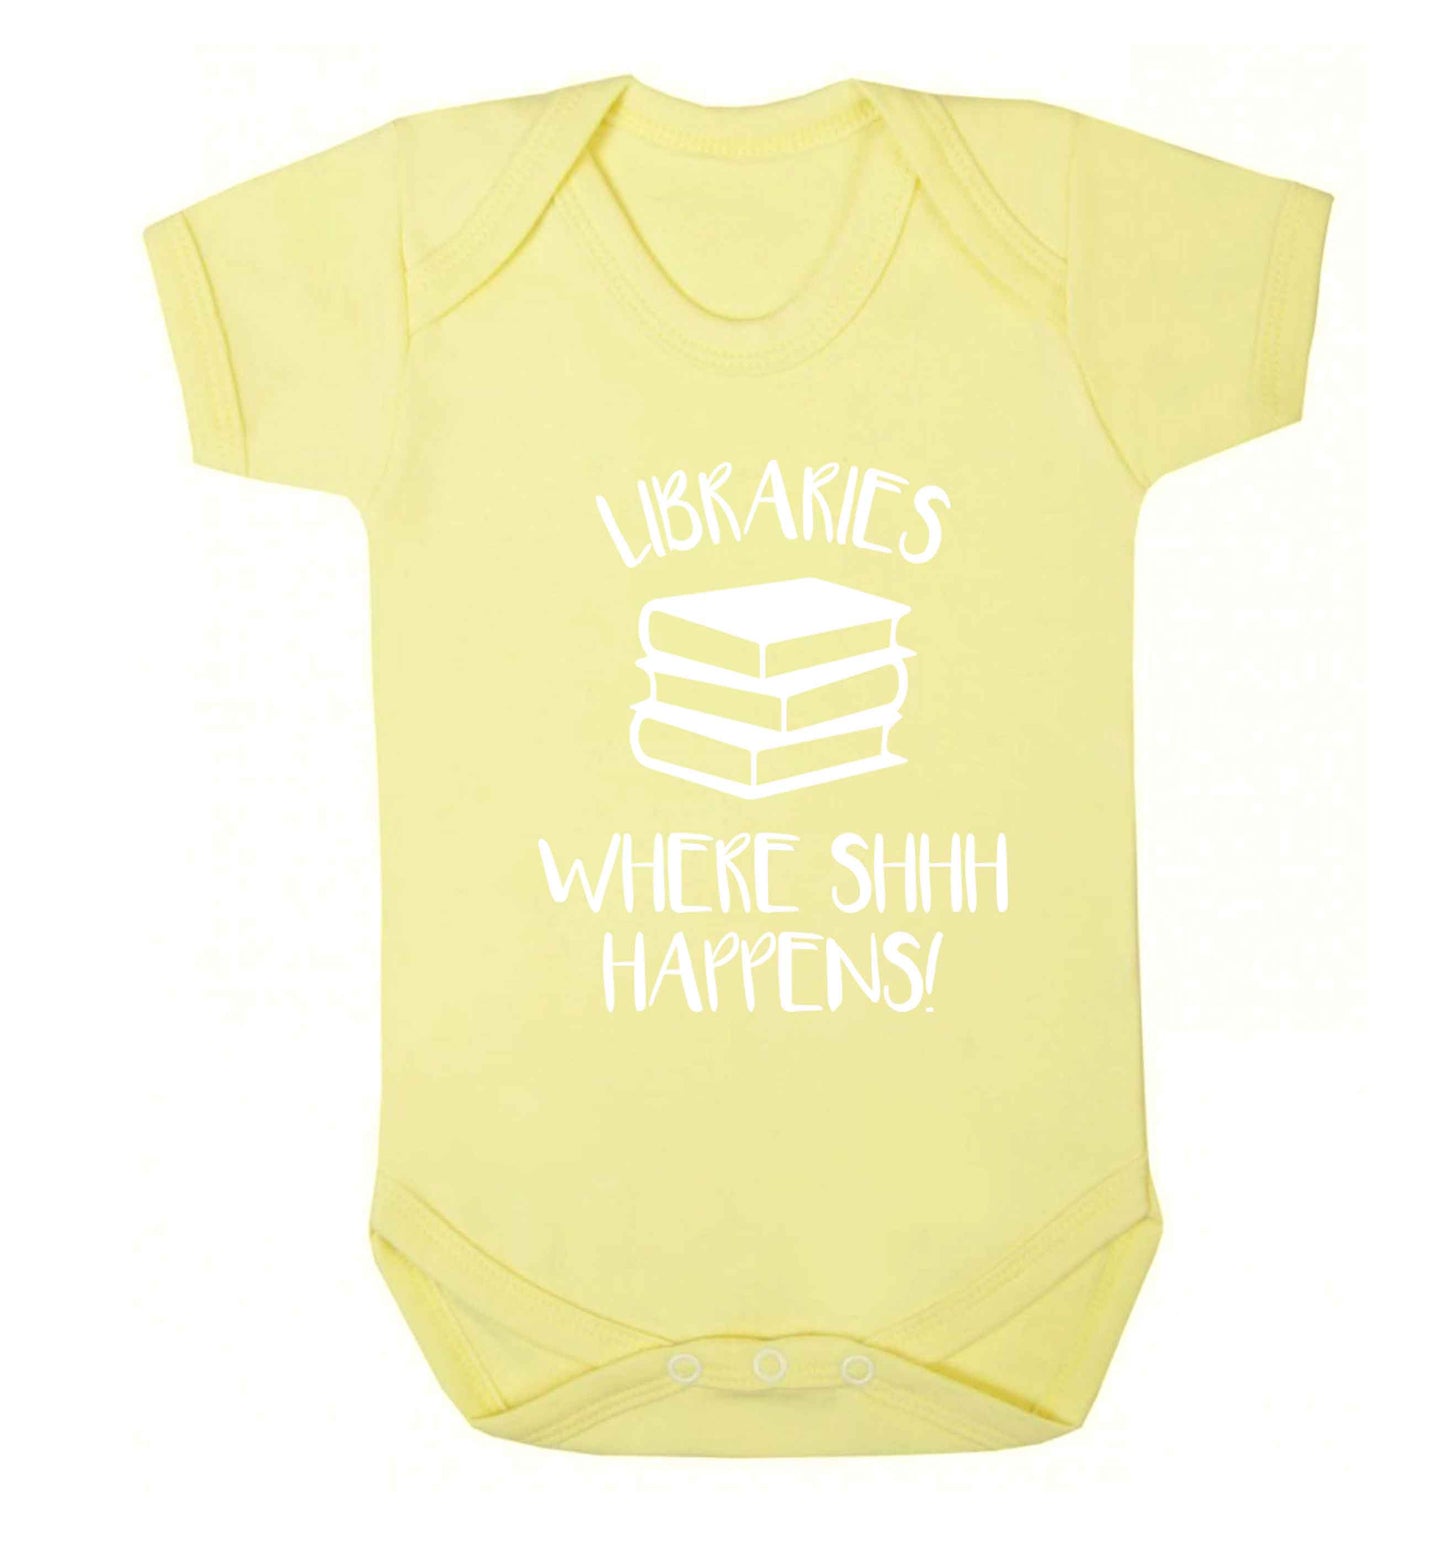 Libraries where shh happens! Baby Vest pale yellow 18-24 months